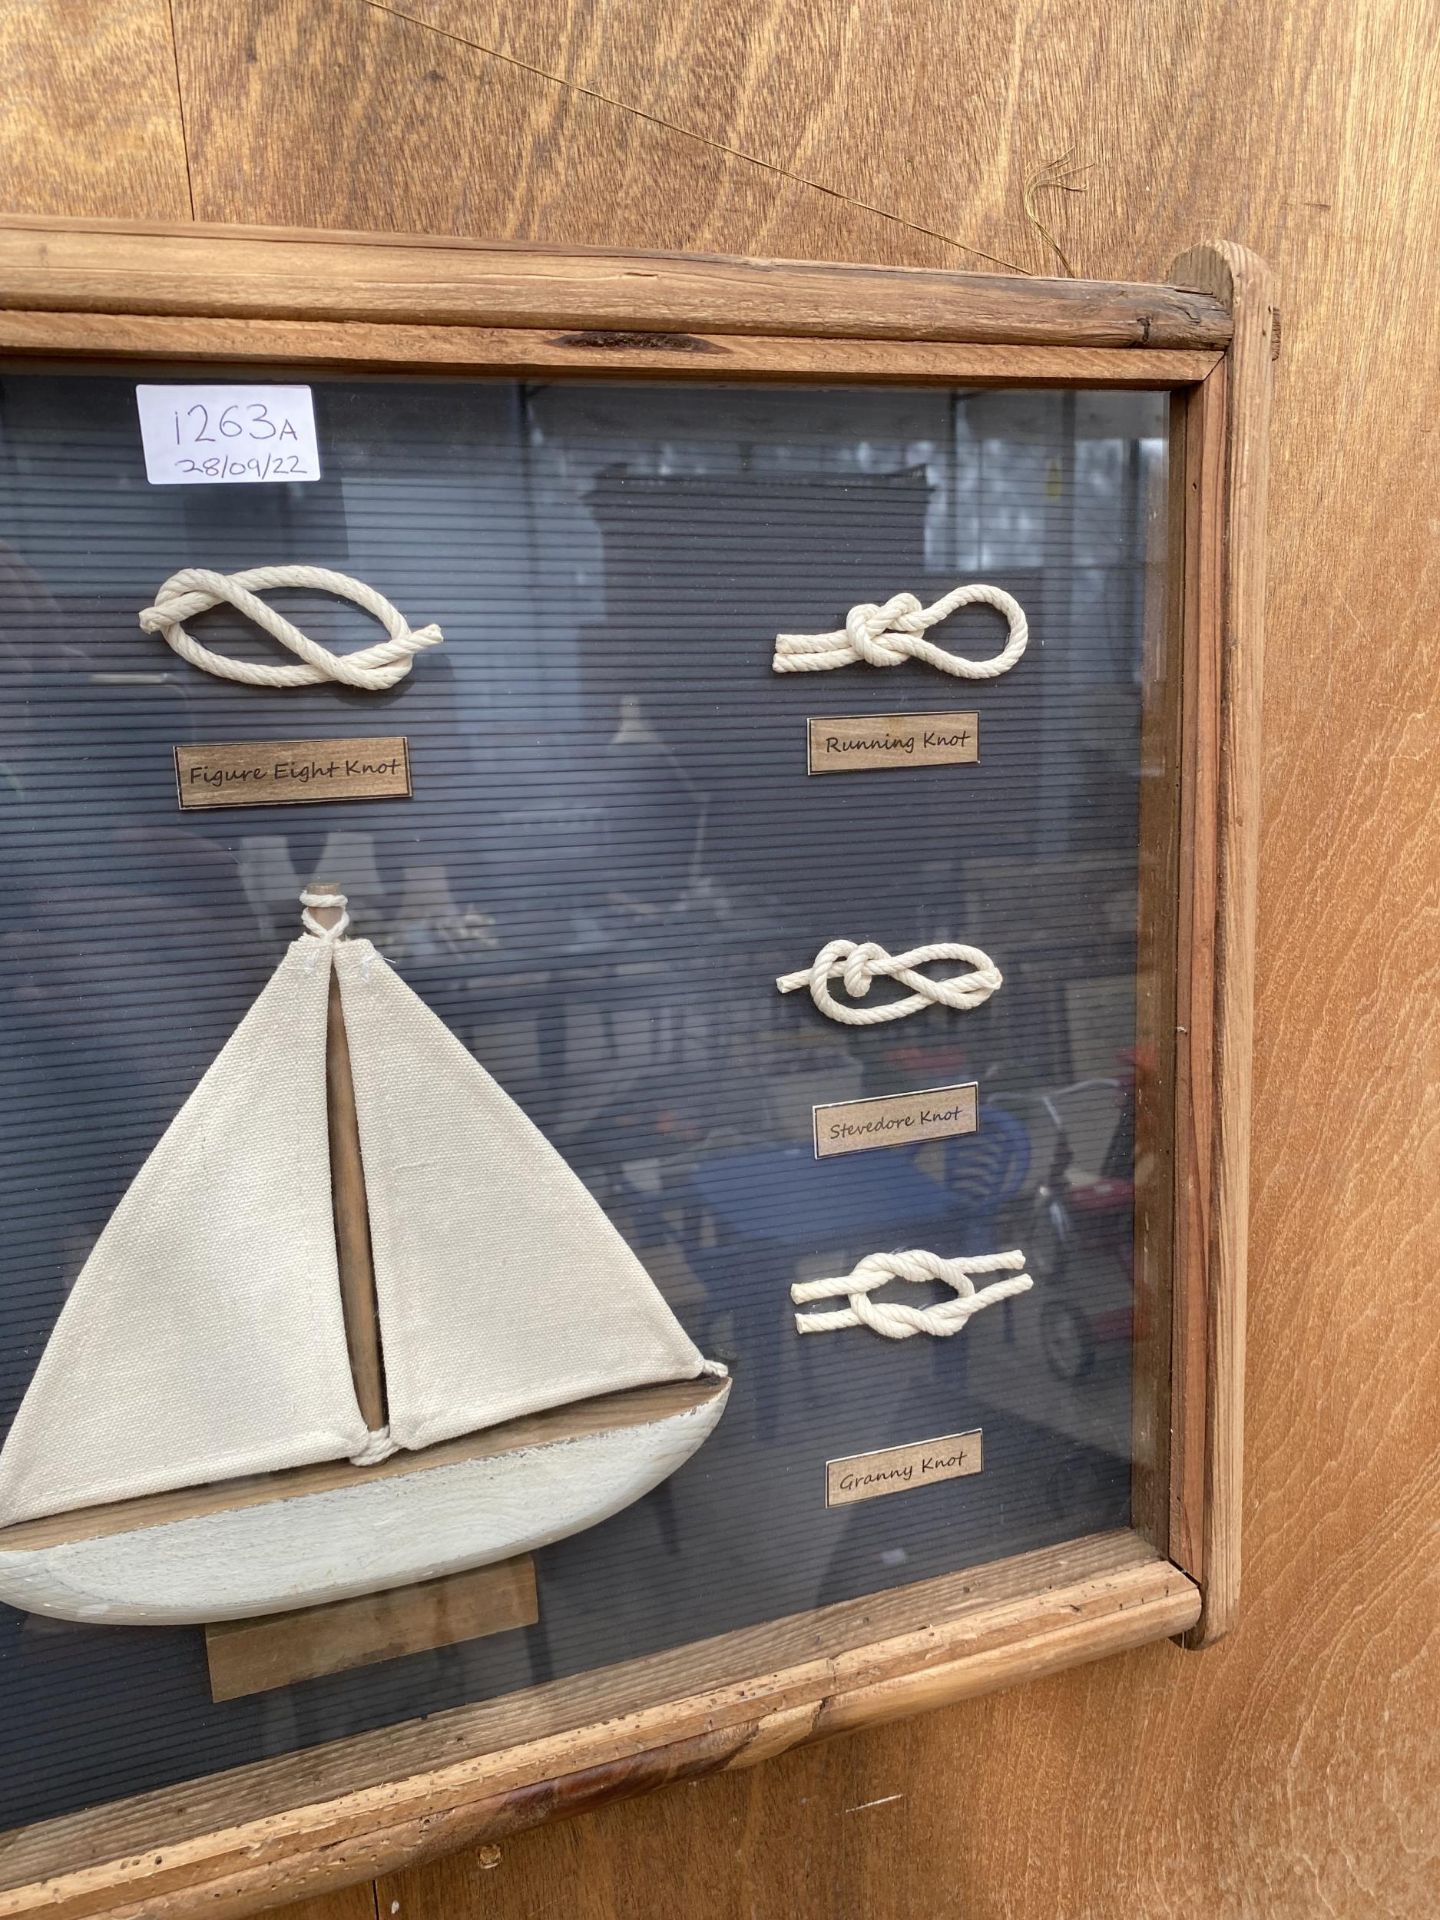 A FRAMED NAUTICAL KNOT TEACHING AID - Image 3 of 3